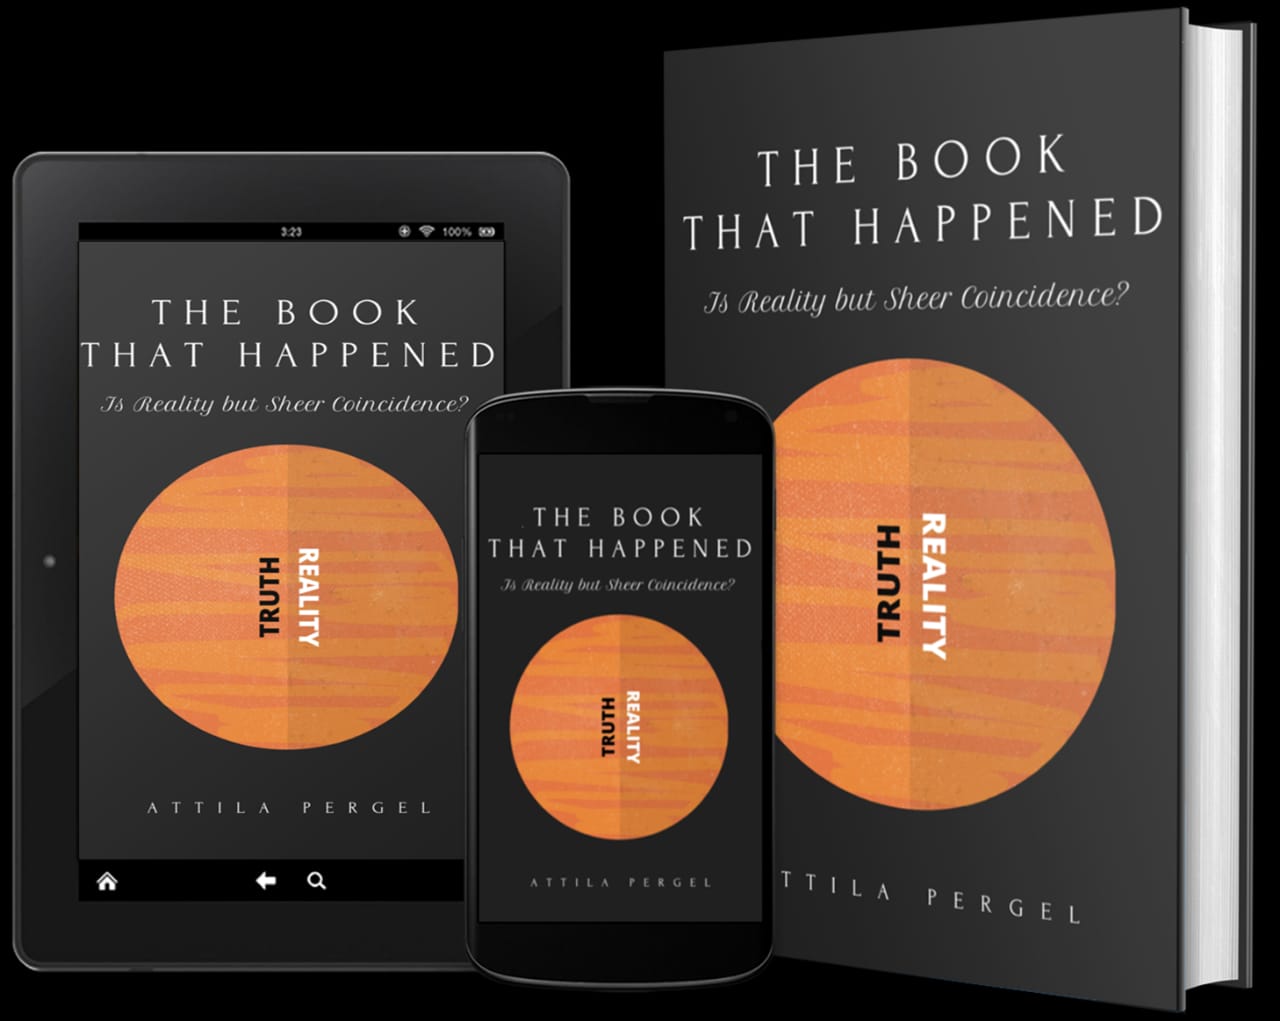 The Book That Happened is a book of discovering the undiscoverable